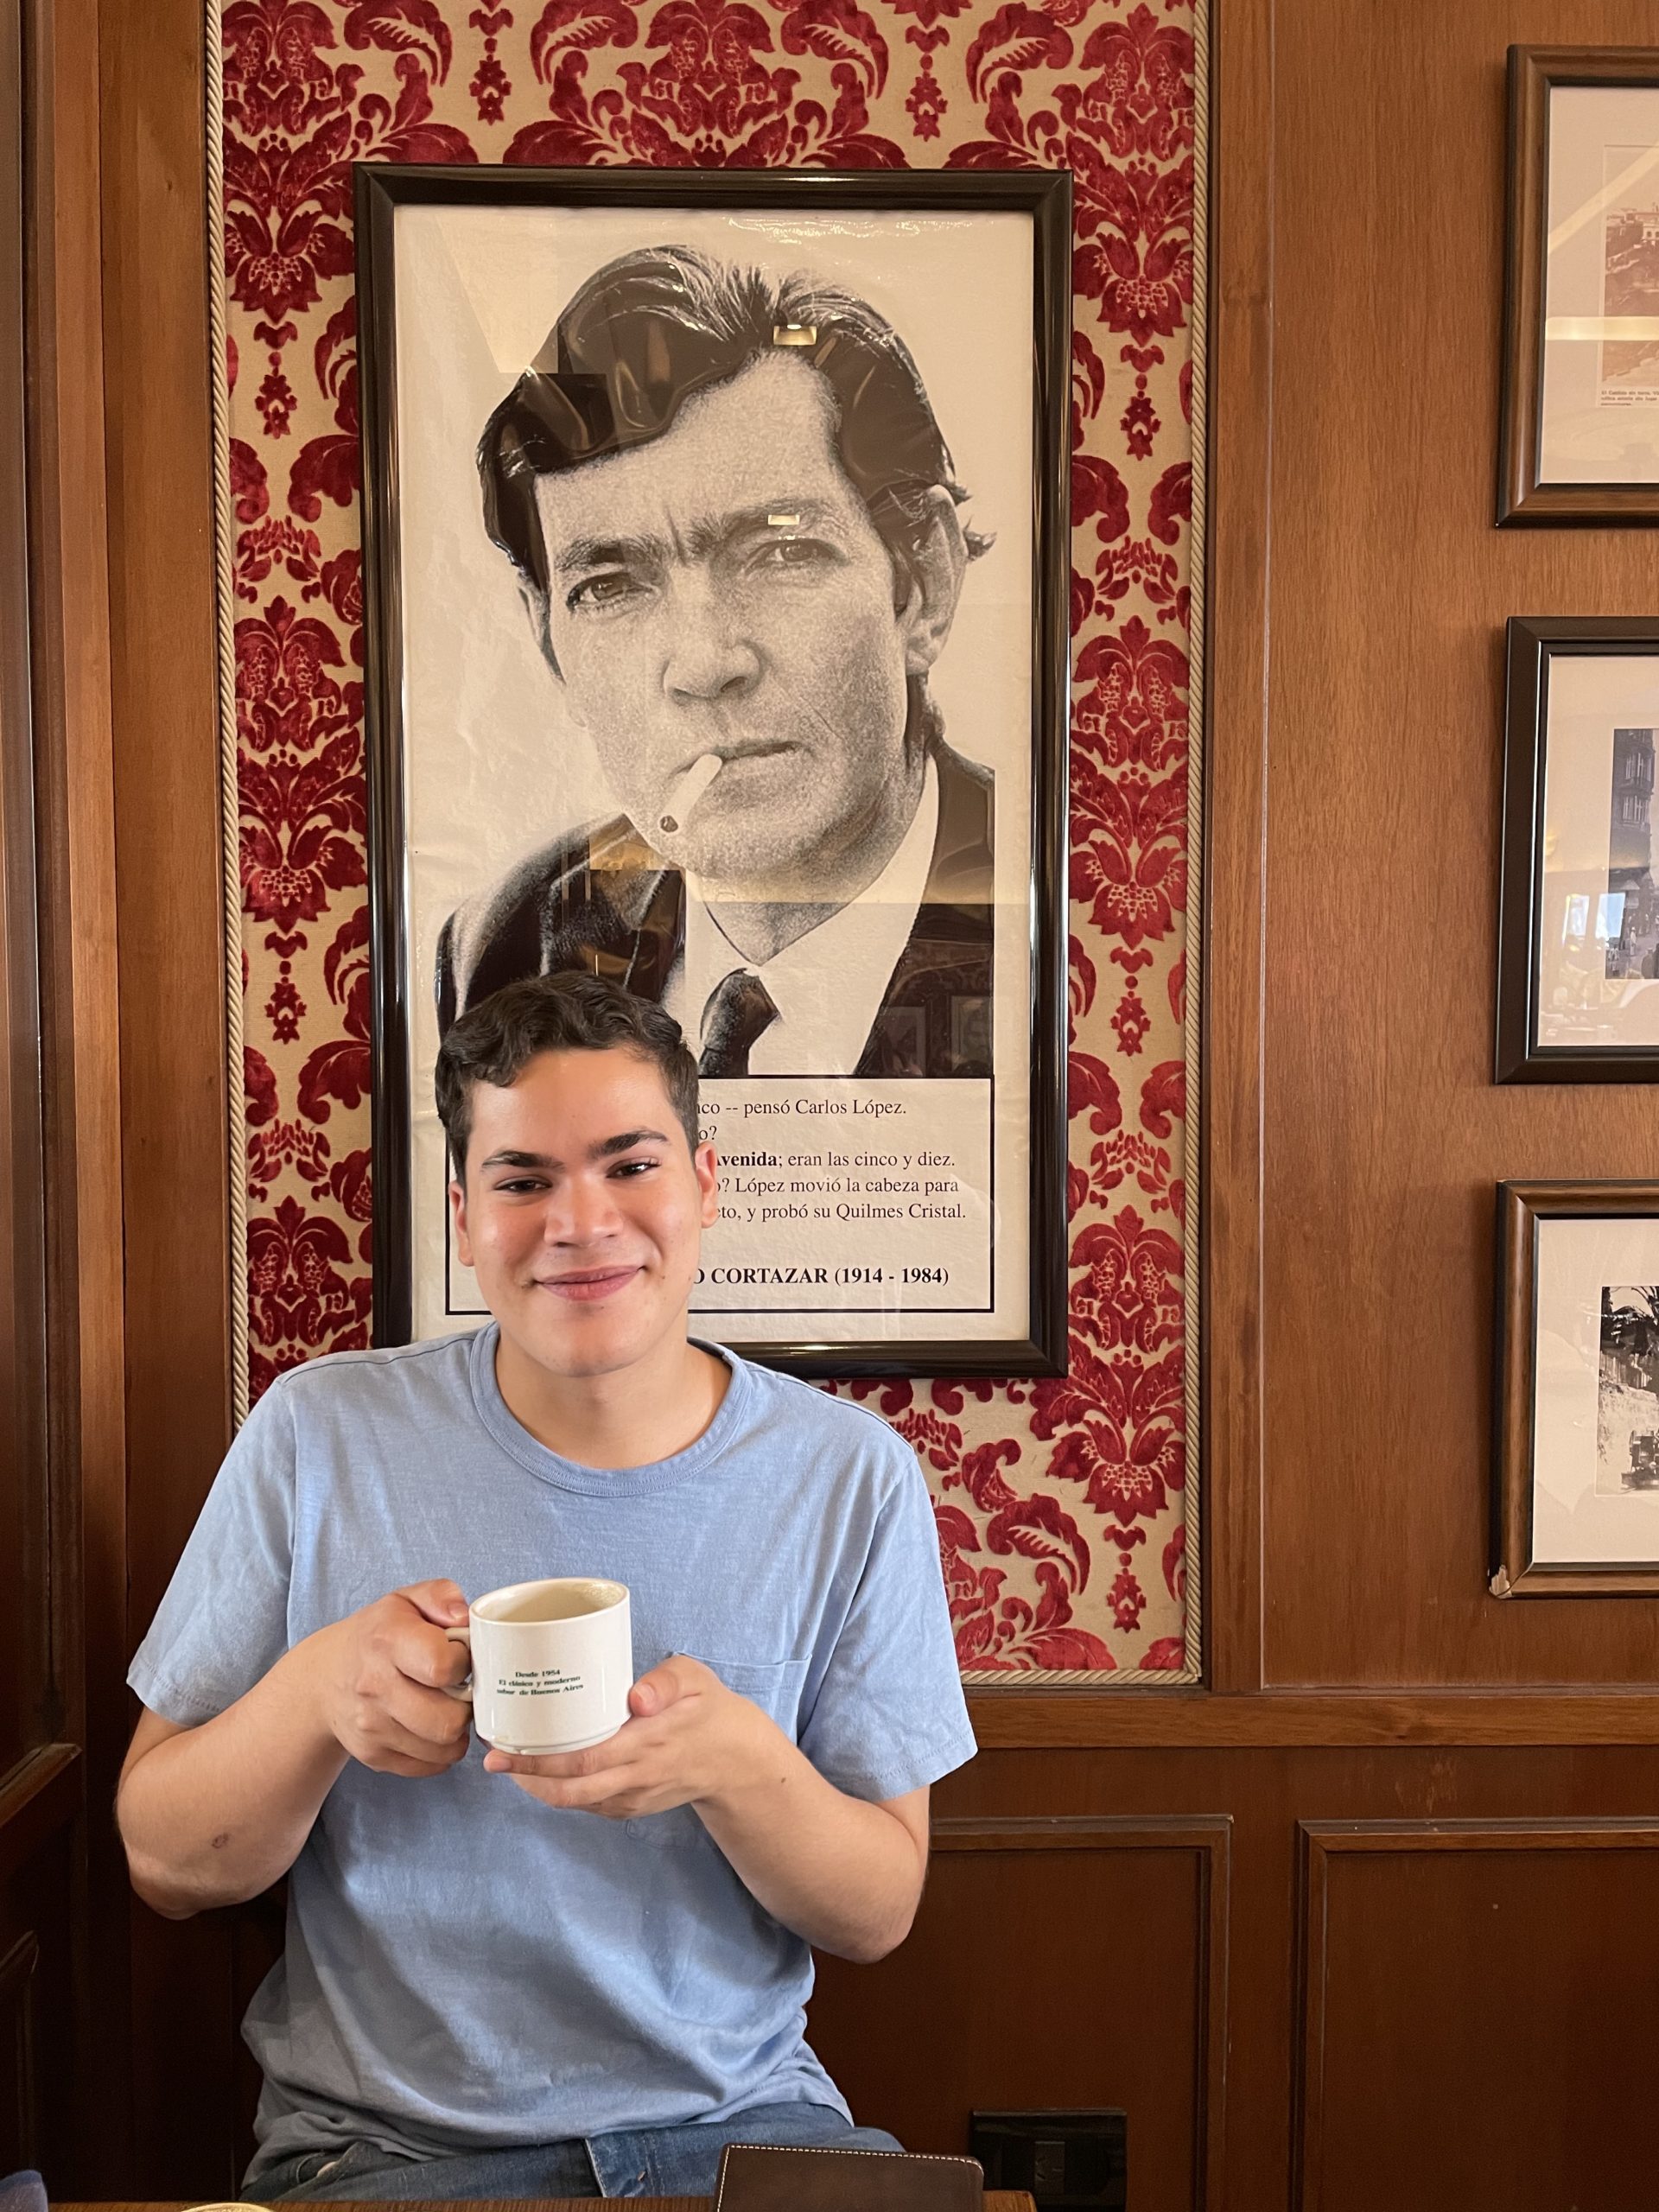 Me drinking coffee in front of a picture of Julio Cortazar